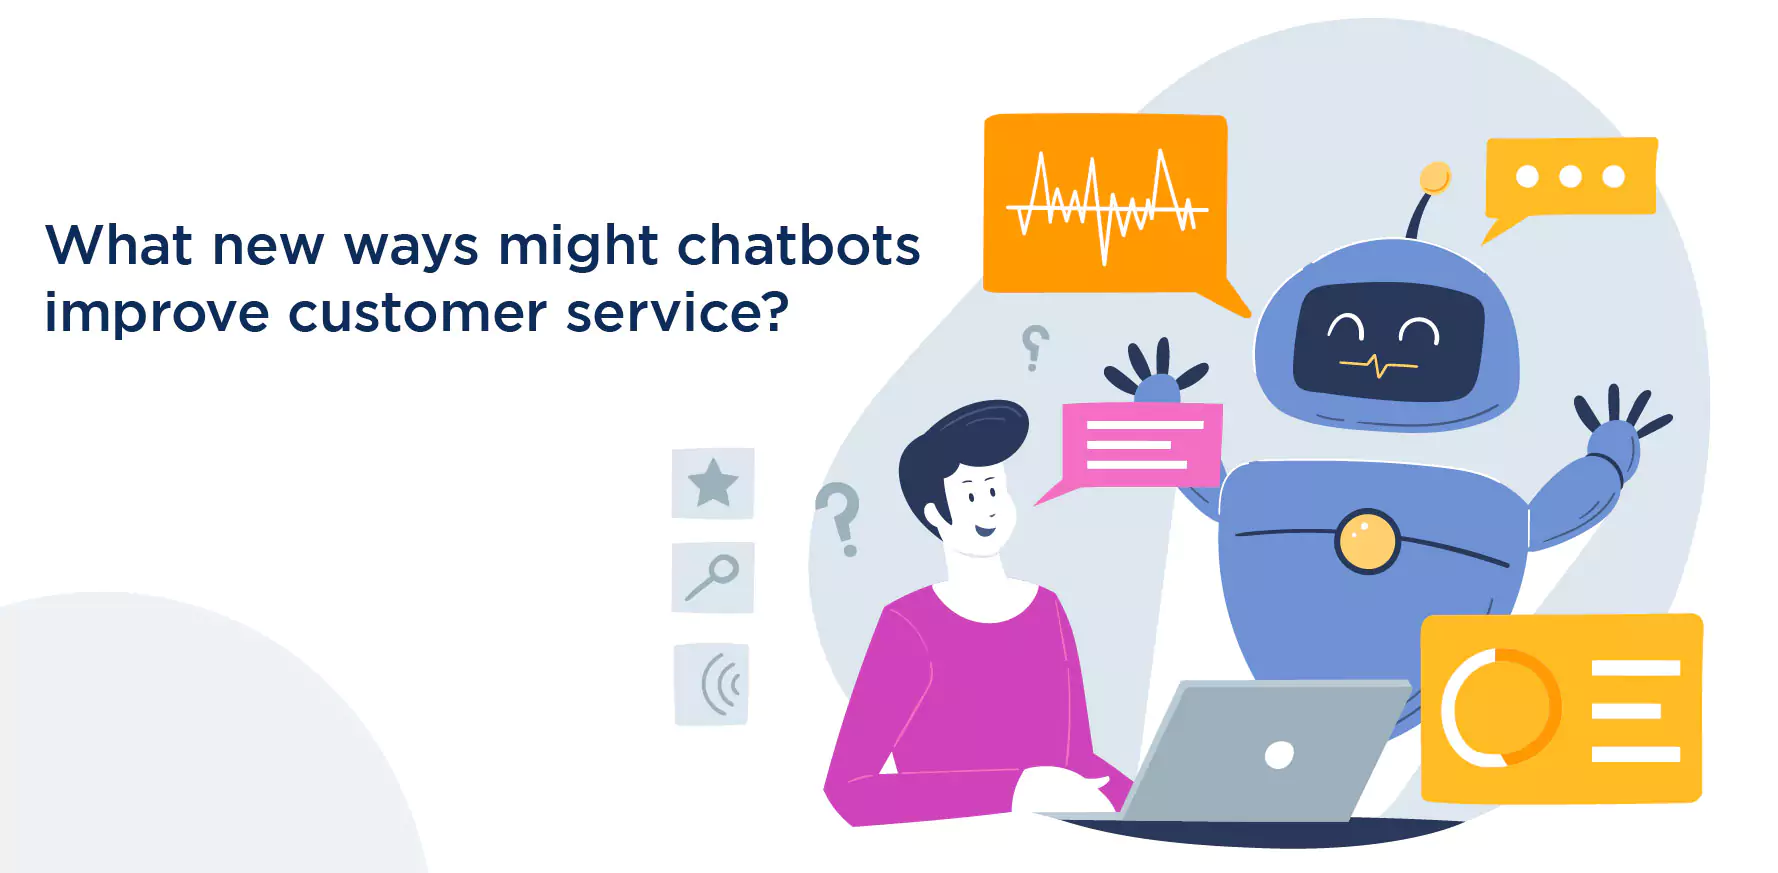 What new ways might chatbots improve customer service?